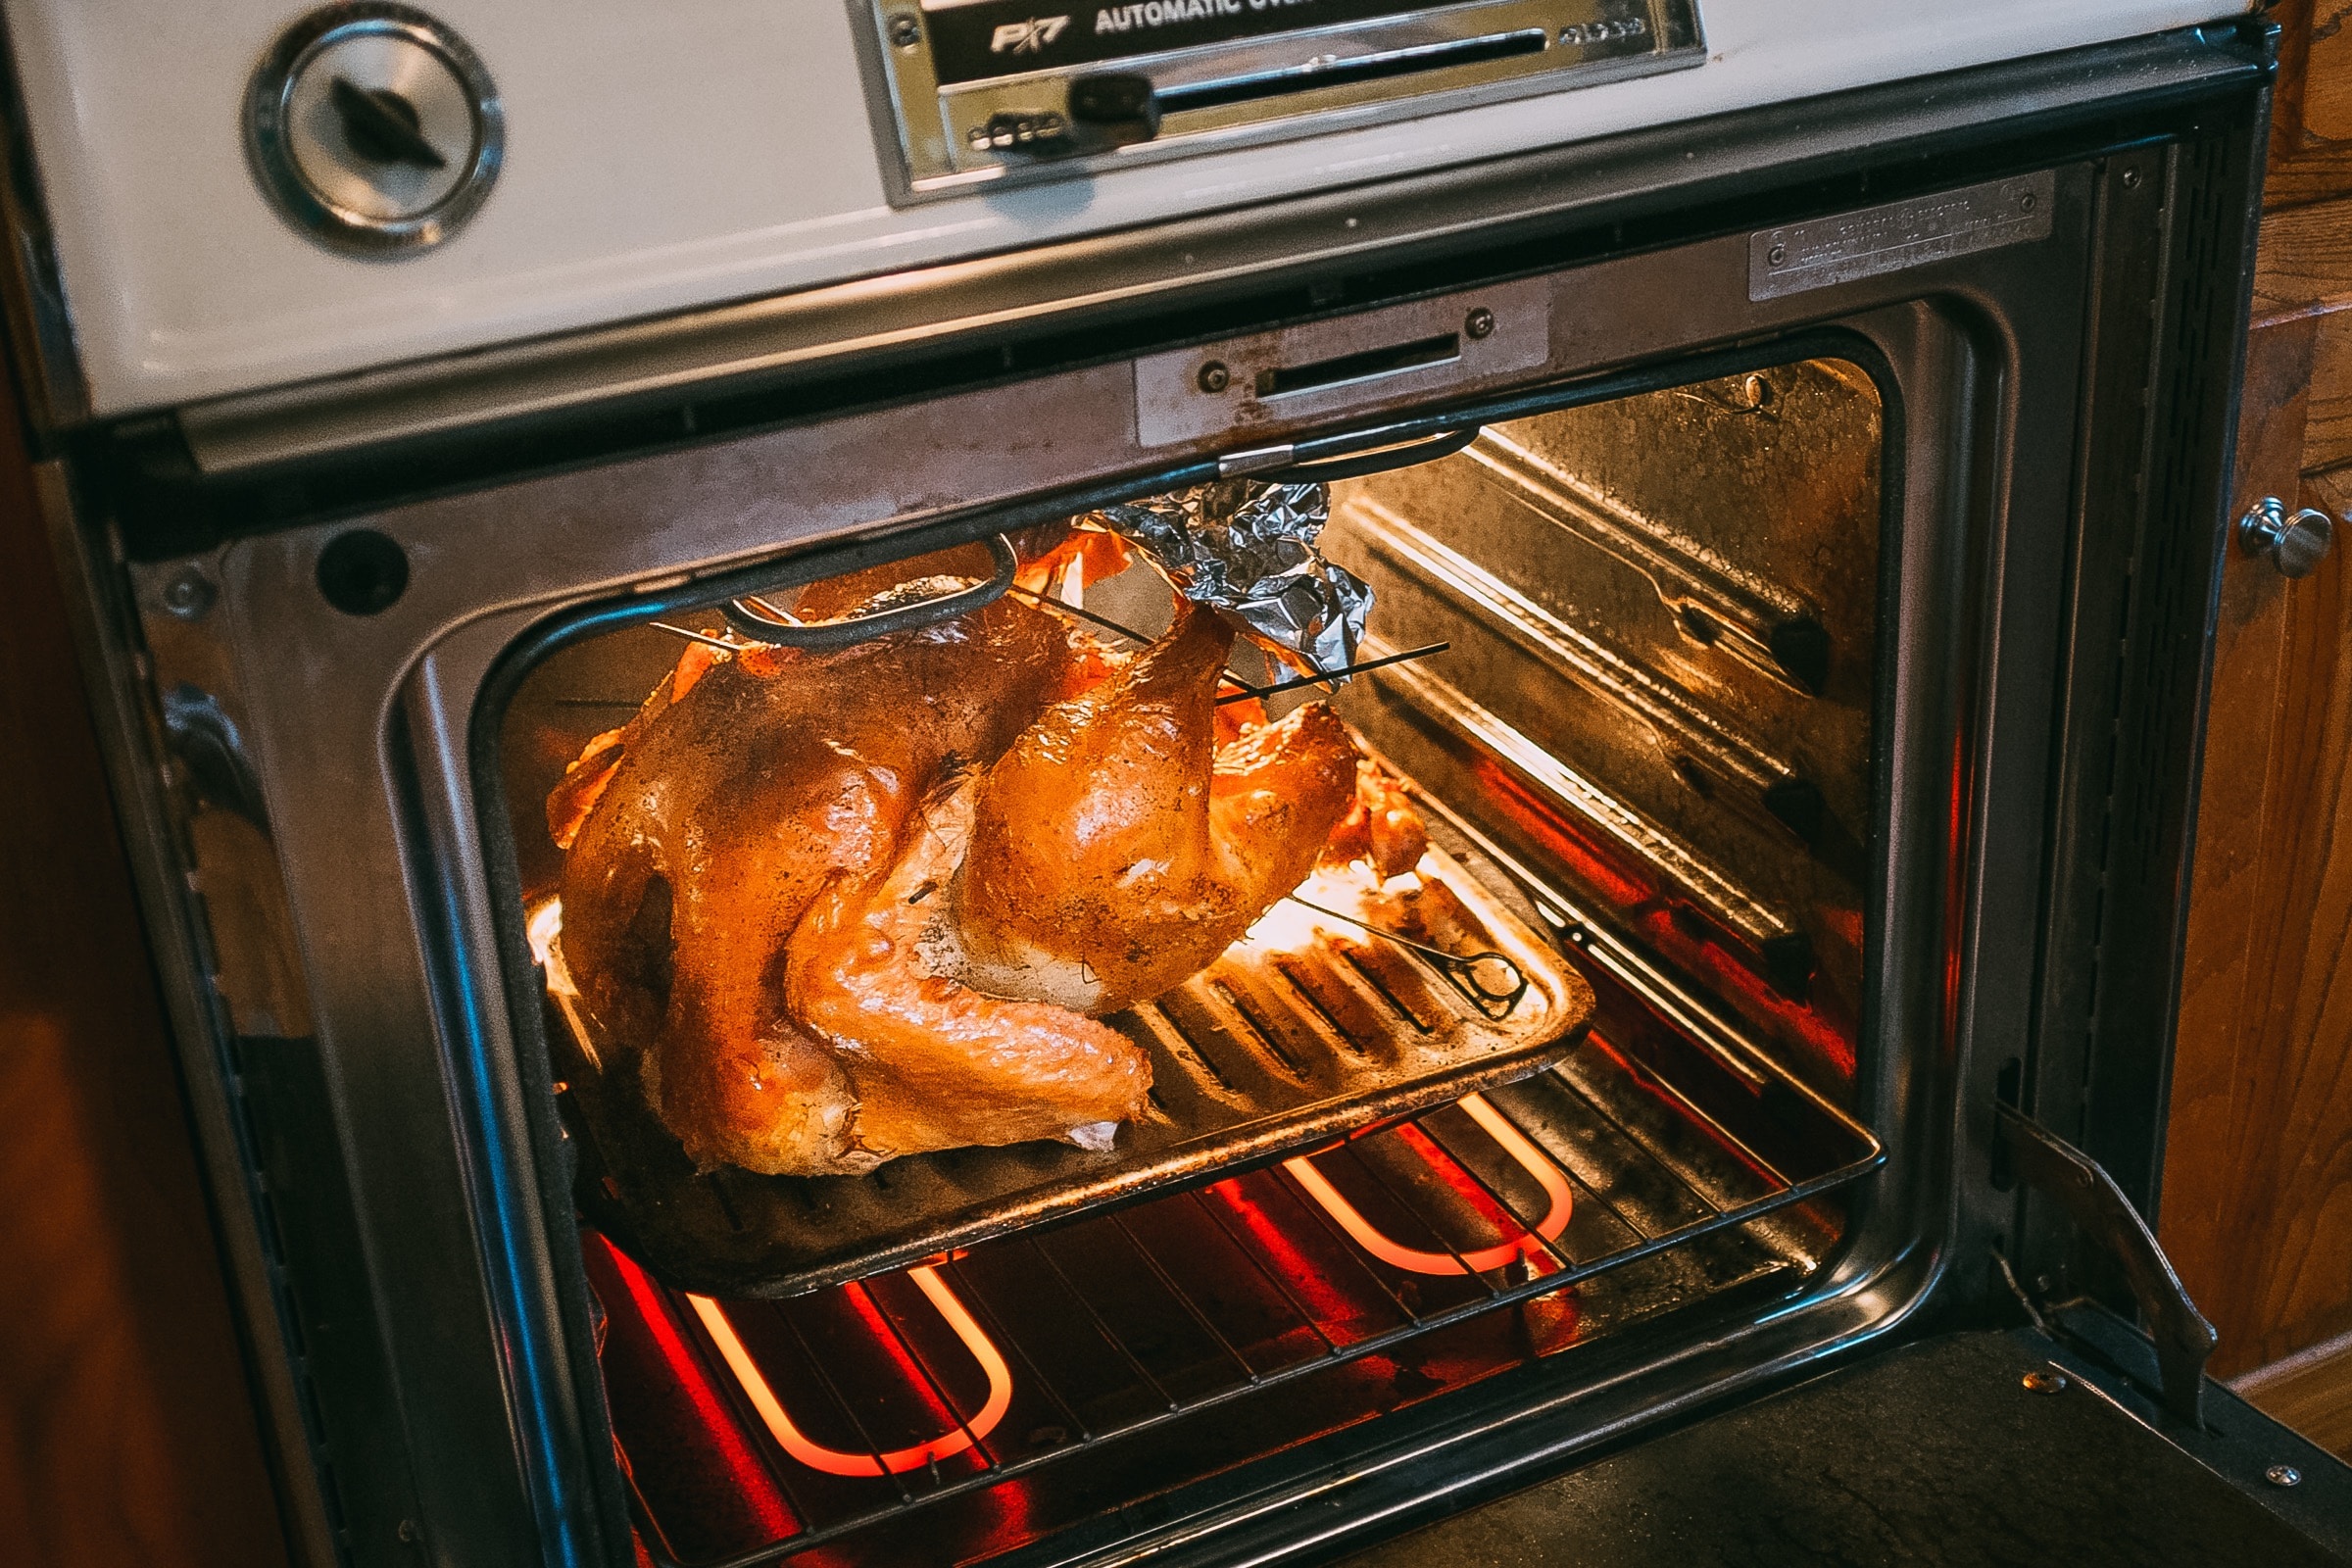 Turkey cooking in oven on thanksgiving; safety tips to avoid electrical hazards